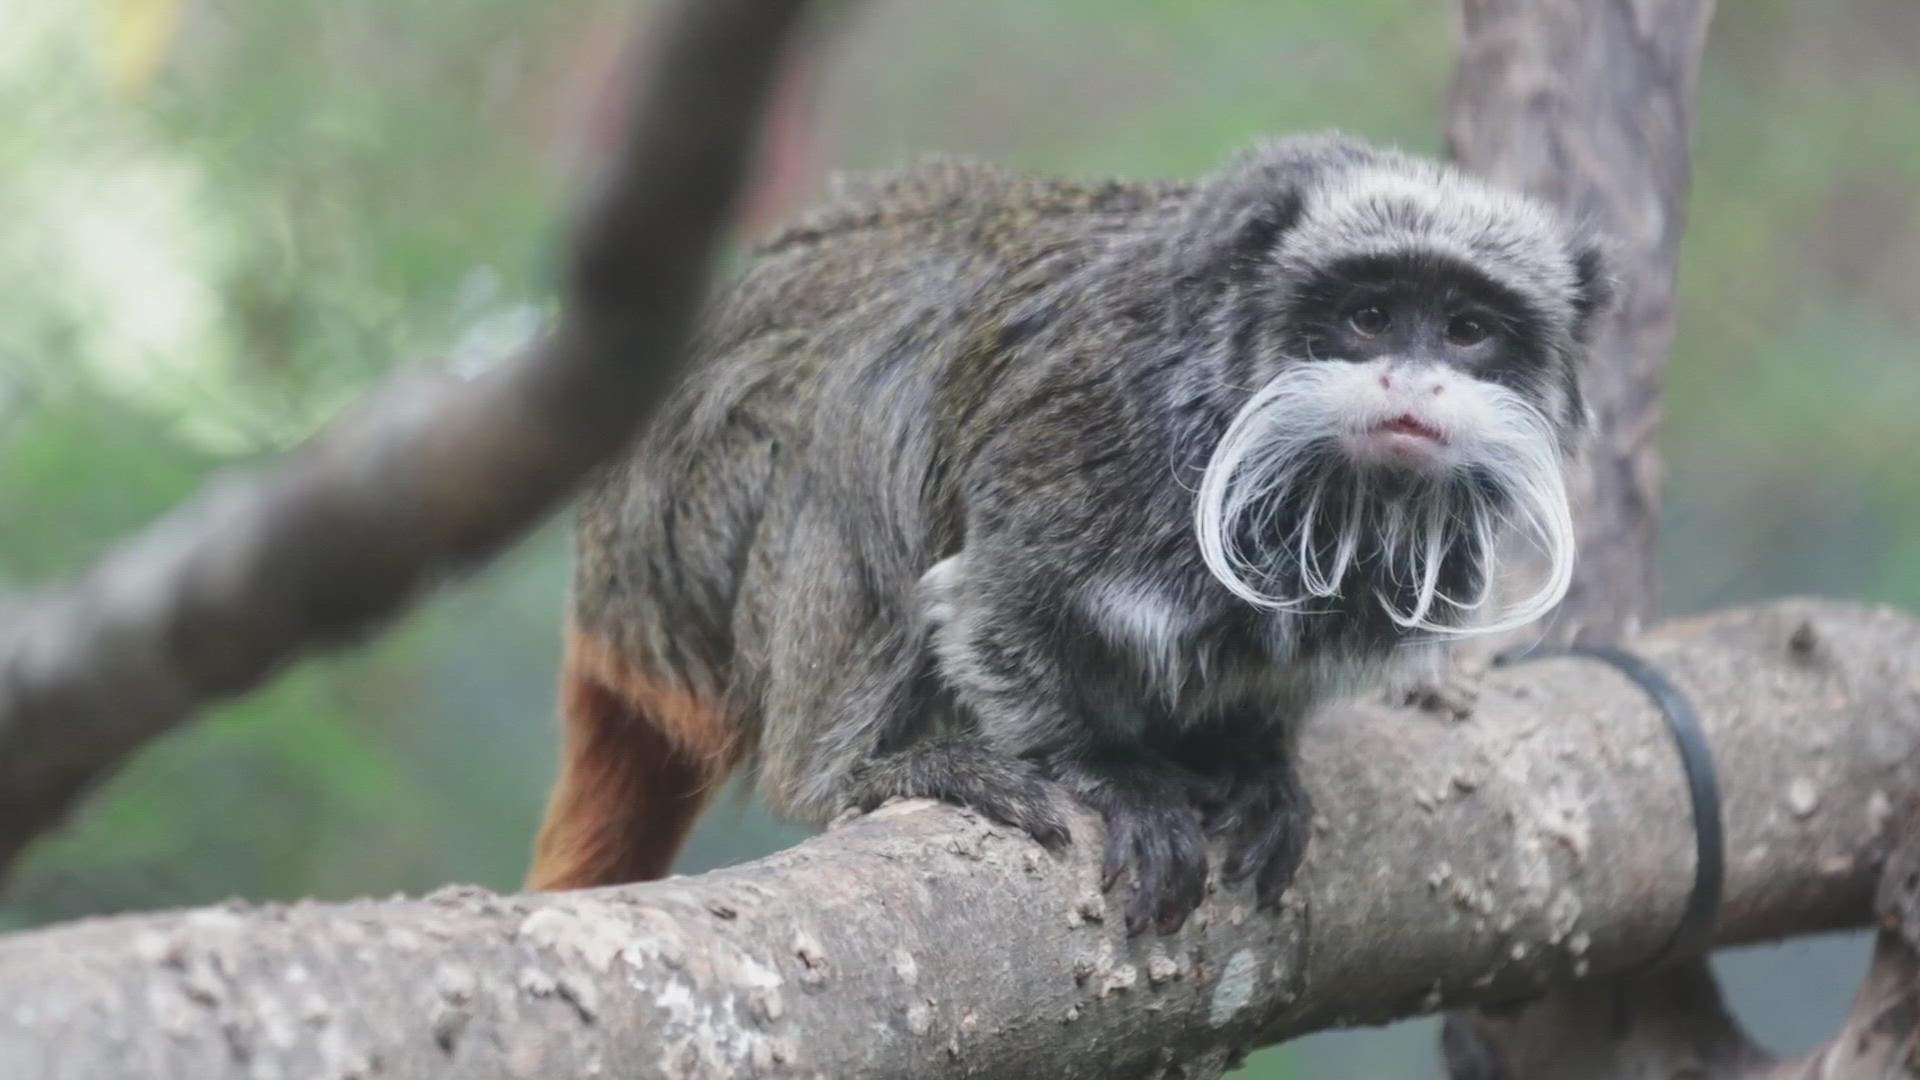 Two emperor tamarin monkeys are missing from the Dallas Zoo, and officials believe they may have been taken.